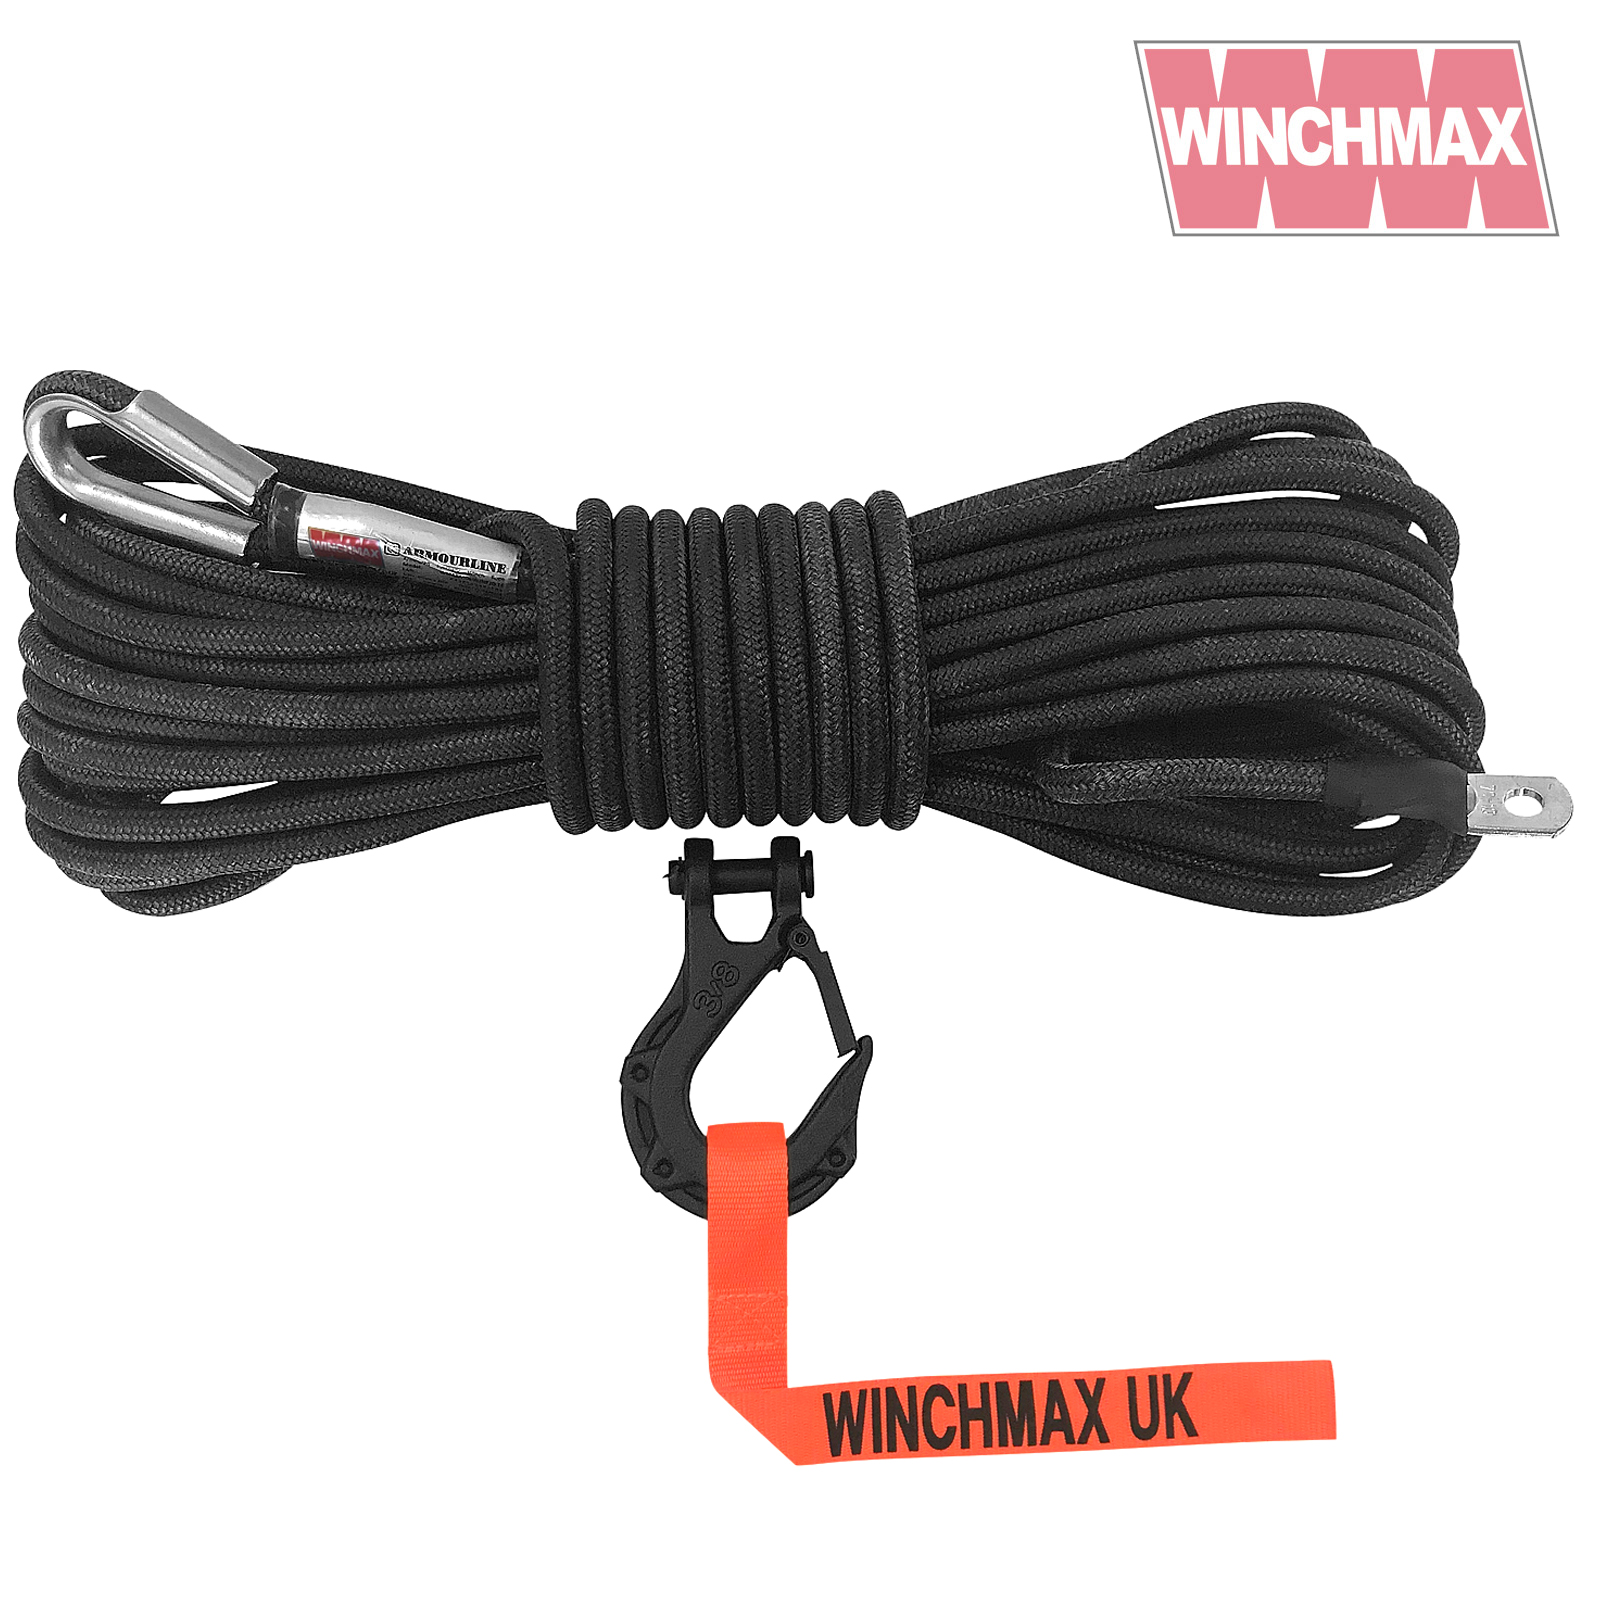 Winchmax Armourline Rope 20m x 10mm and Tactical Hook